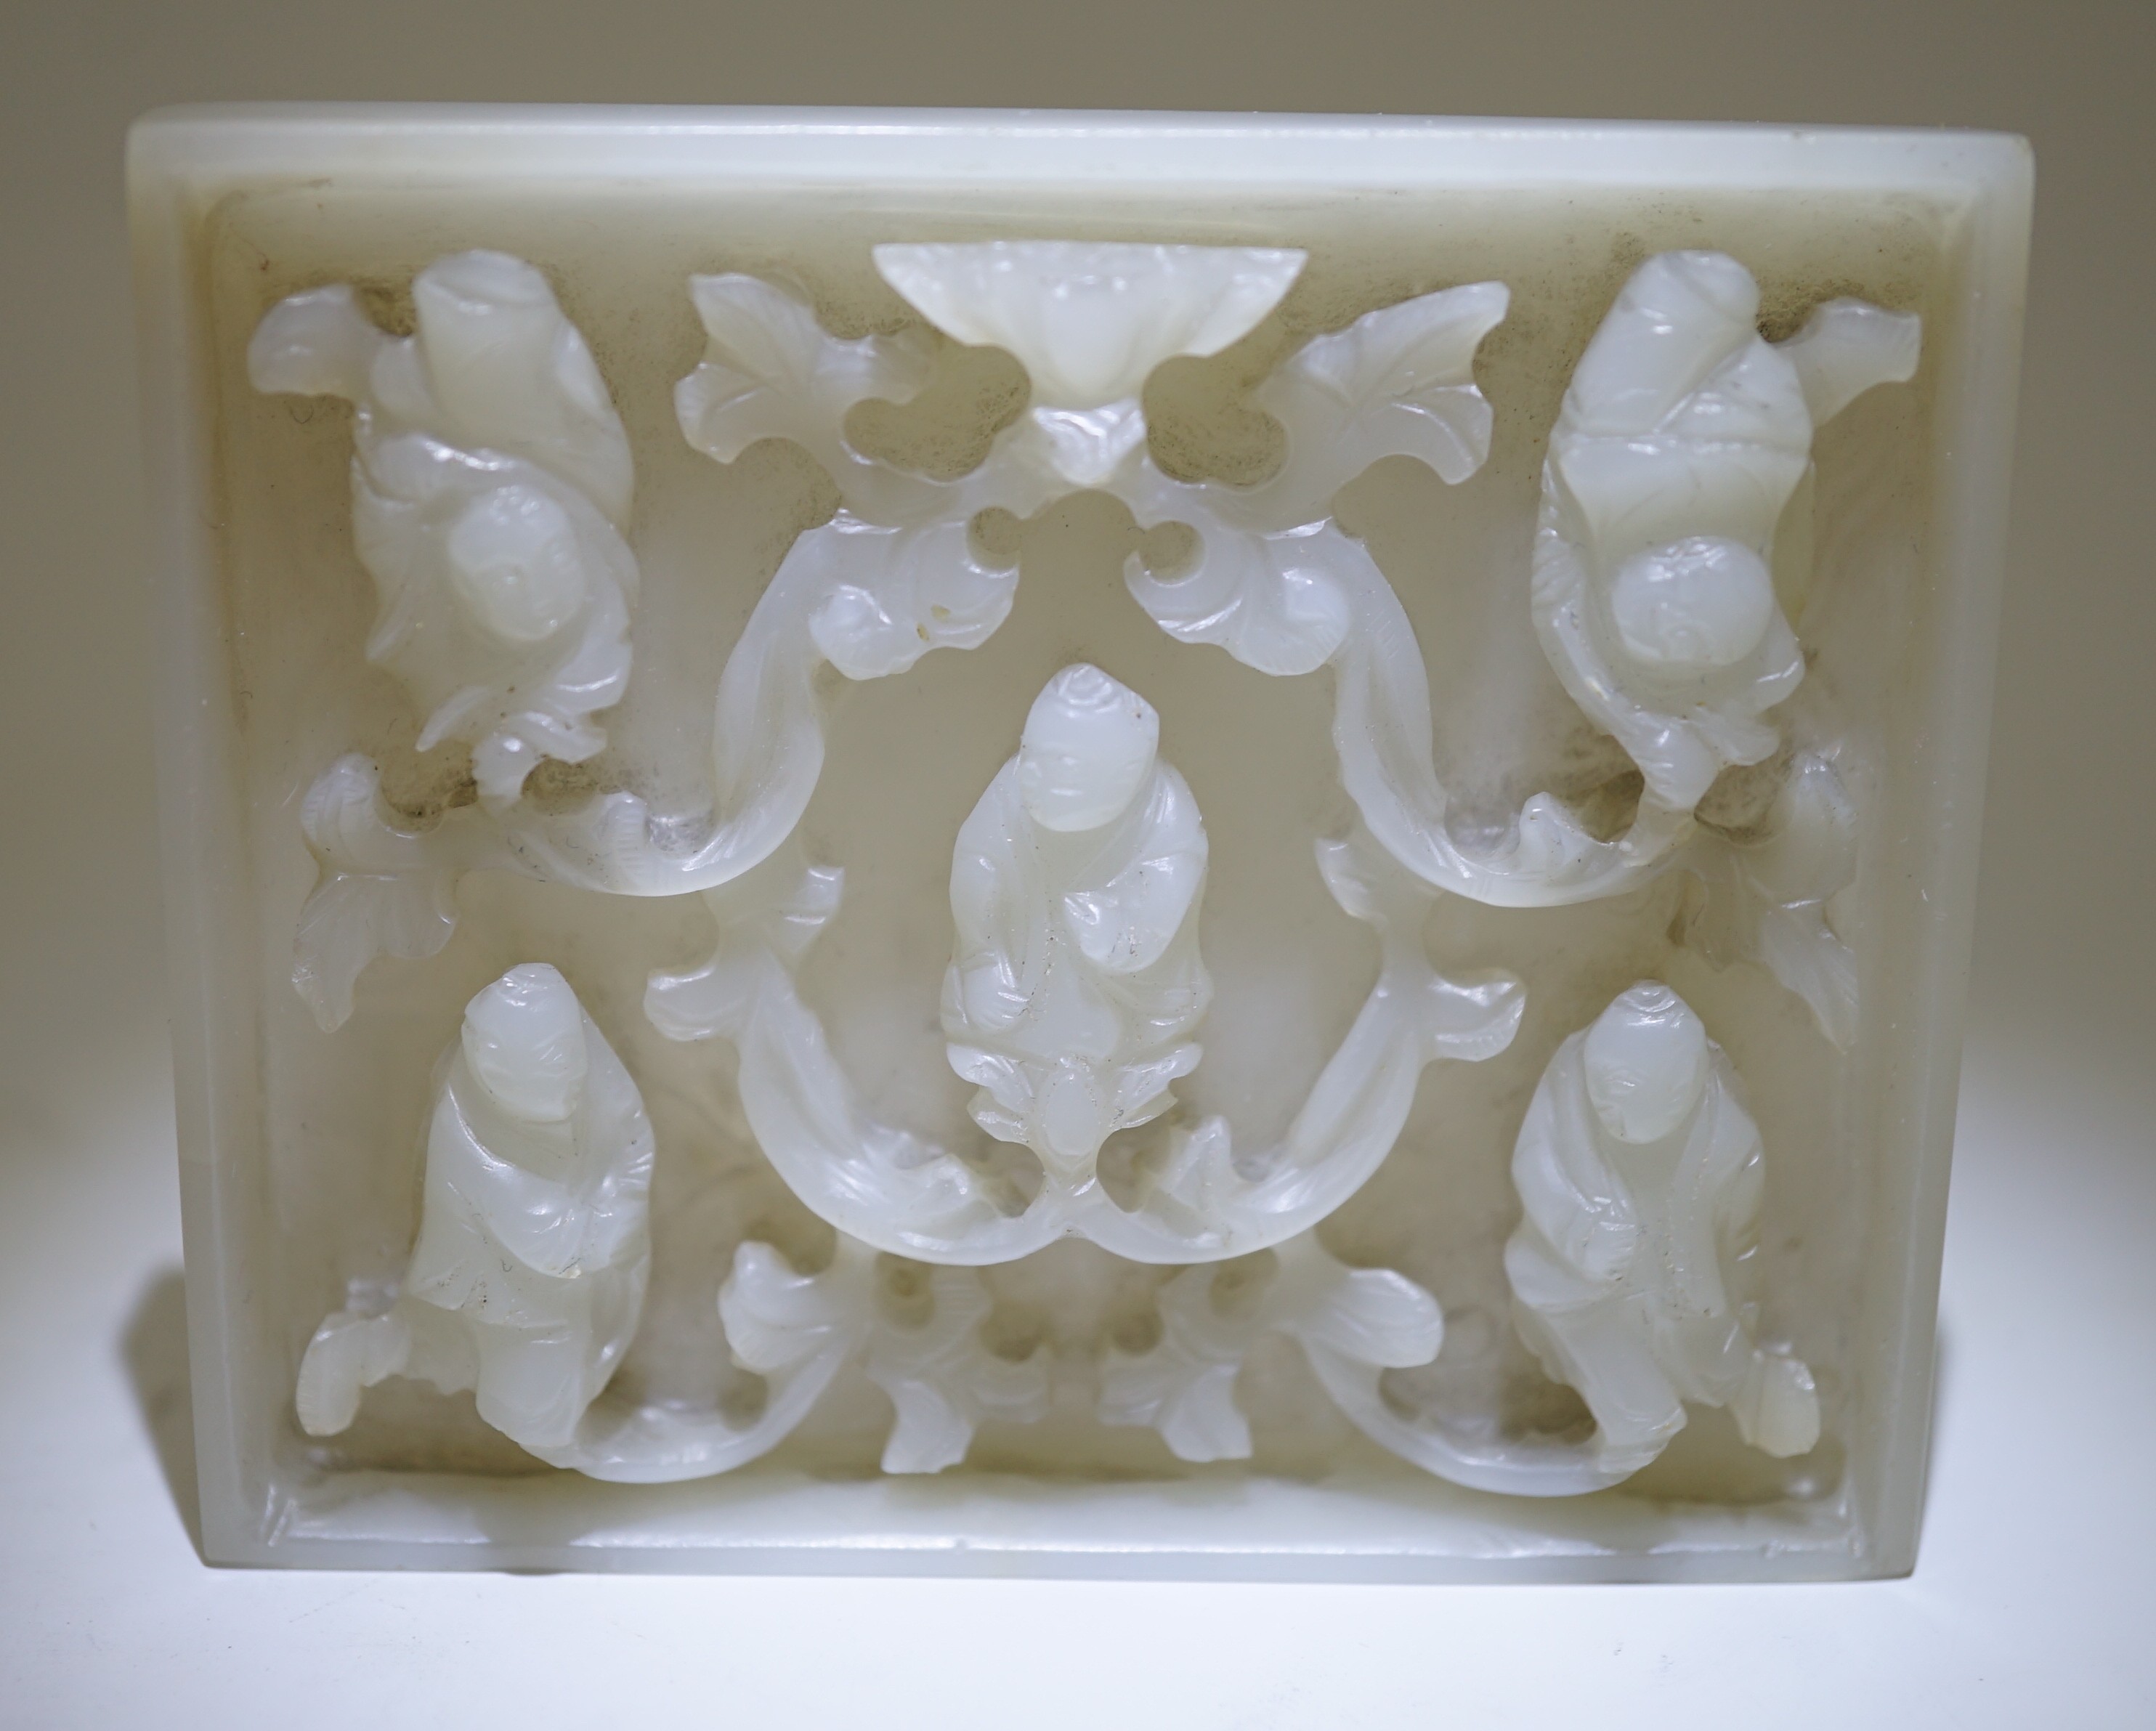 An unusual Chinese white jade plaque, 18th/19th century, 6.7cm x 8.1cm, wood stand